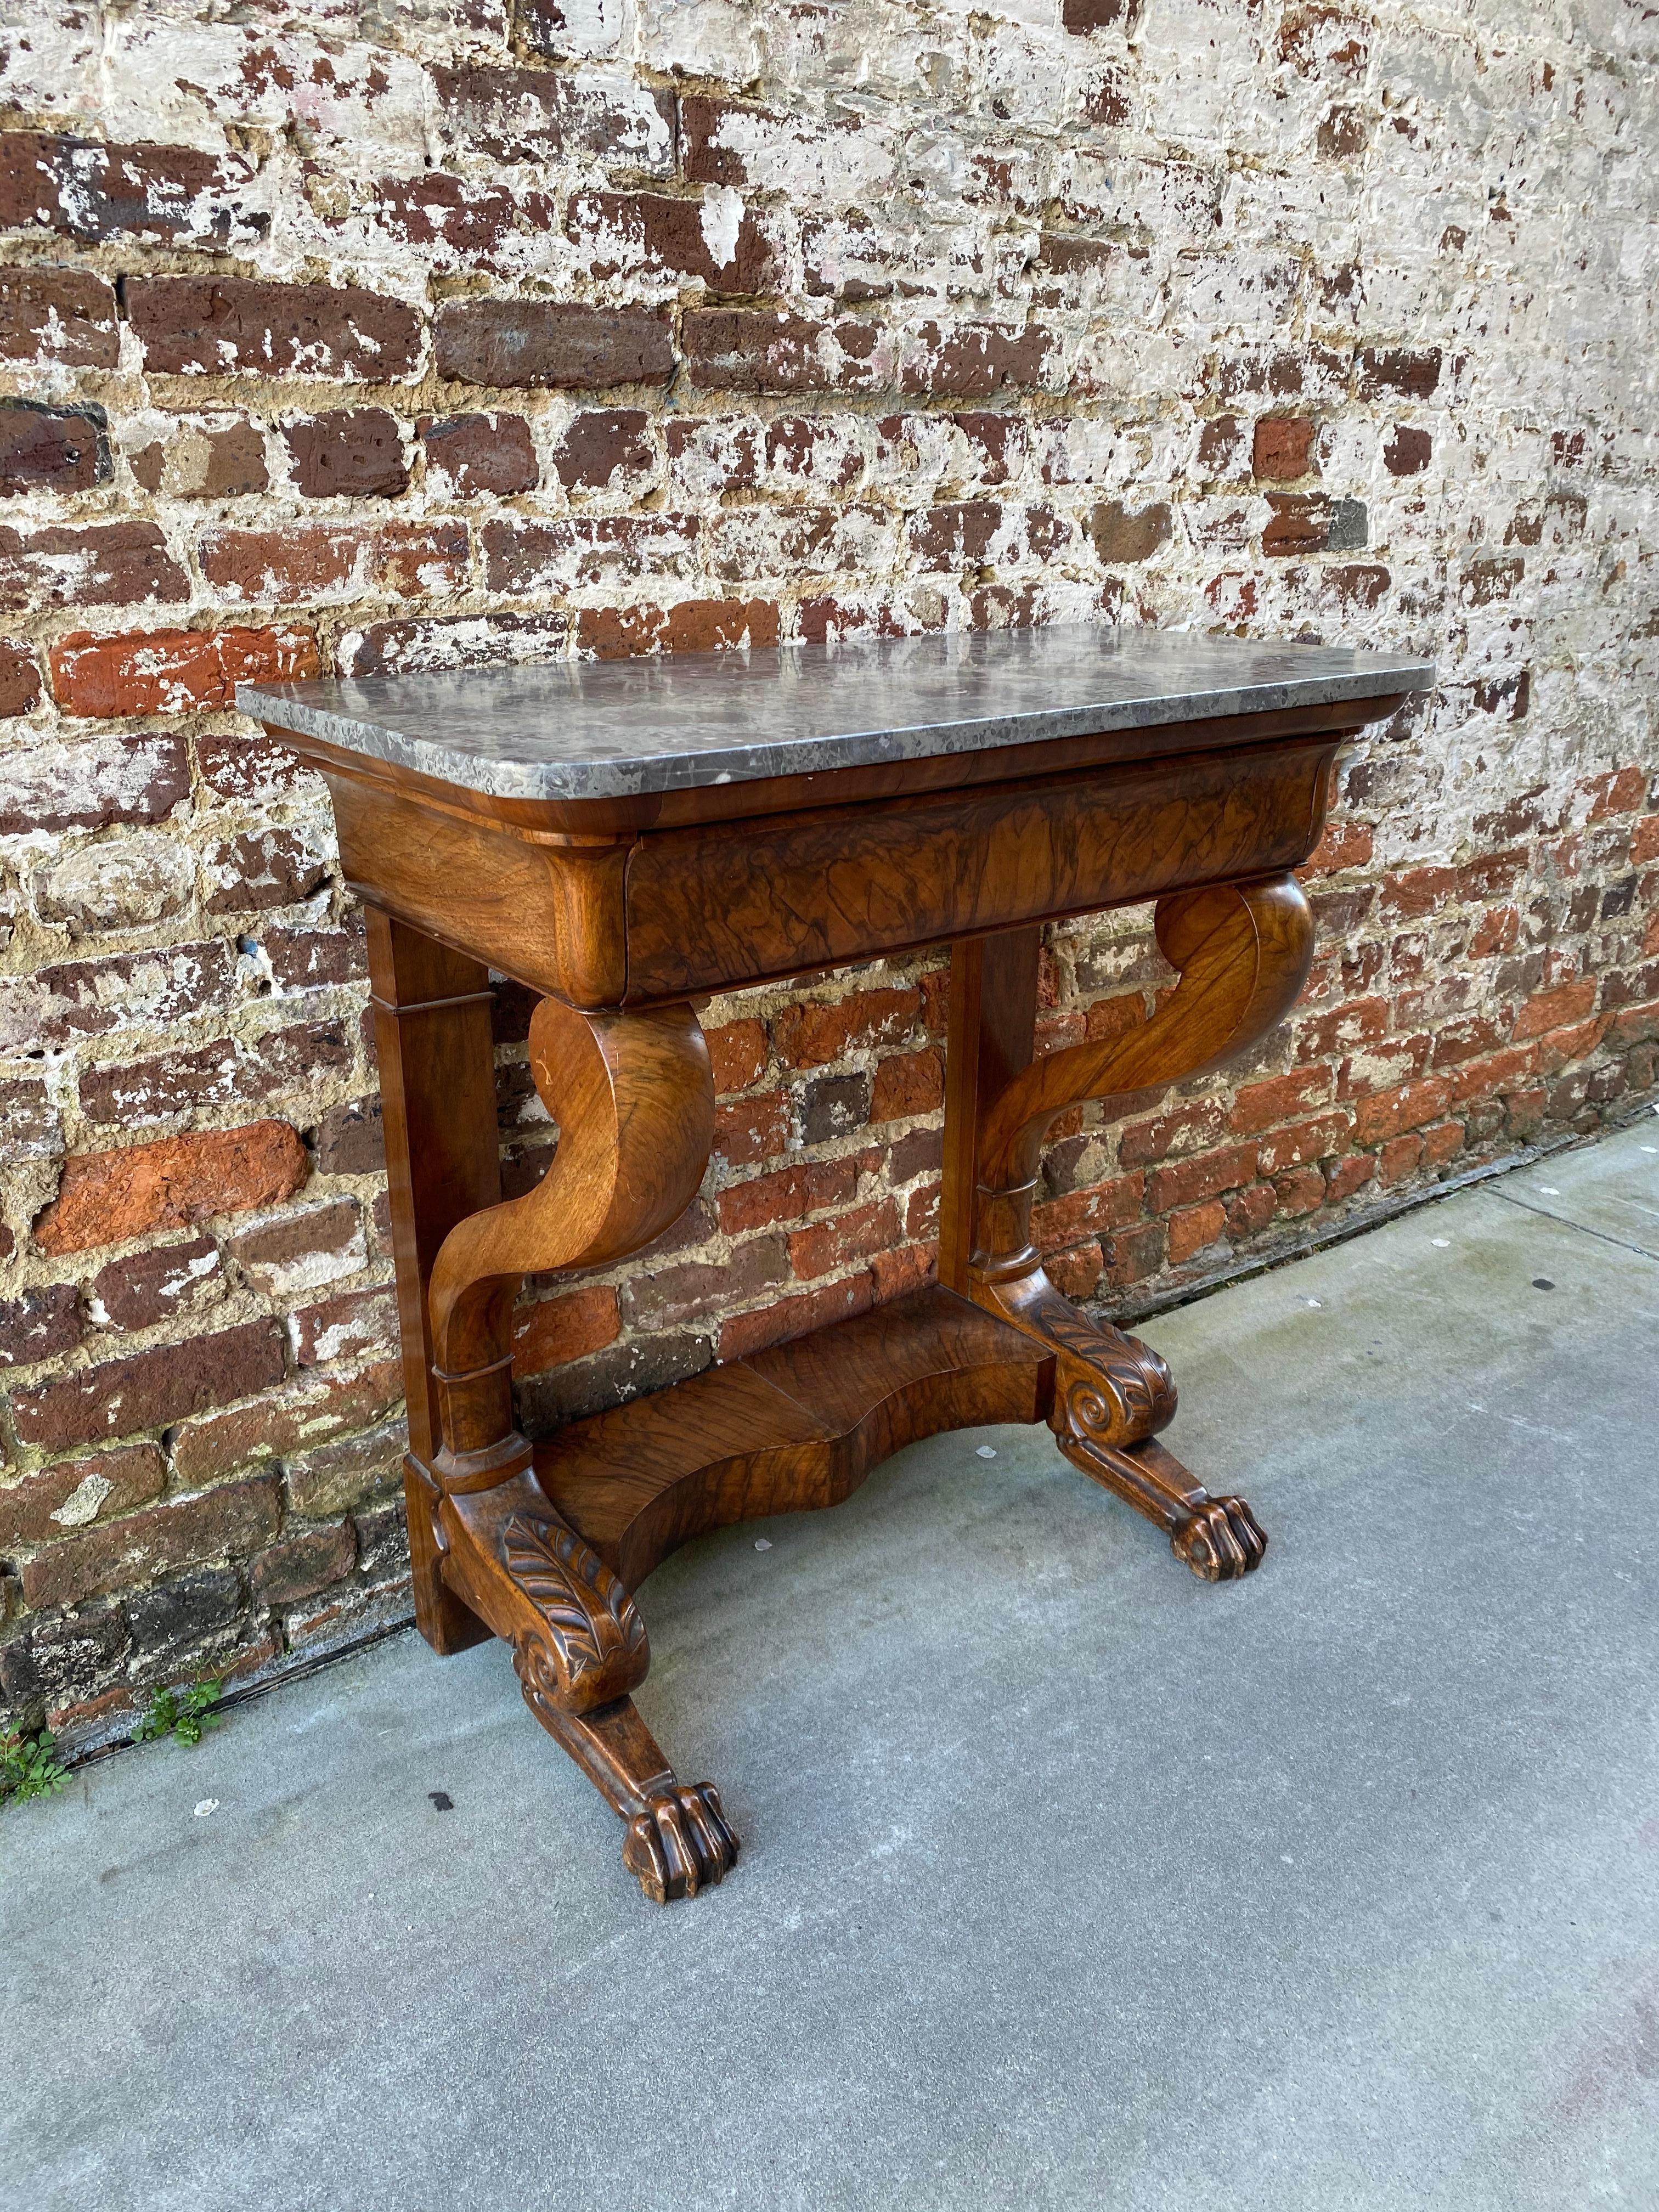 French mahogany marble top console table with paw feet mid 19th century.